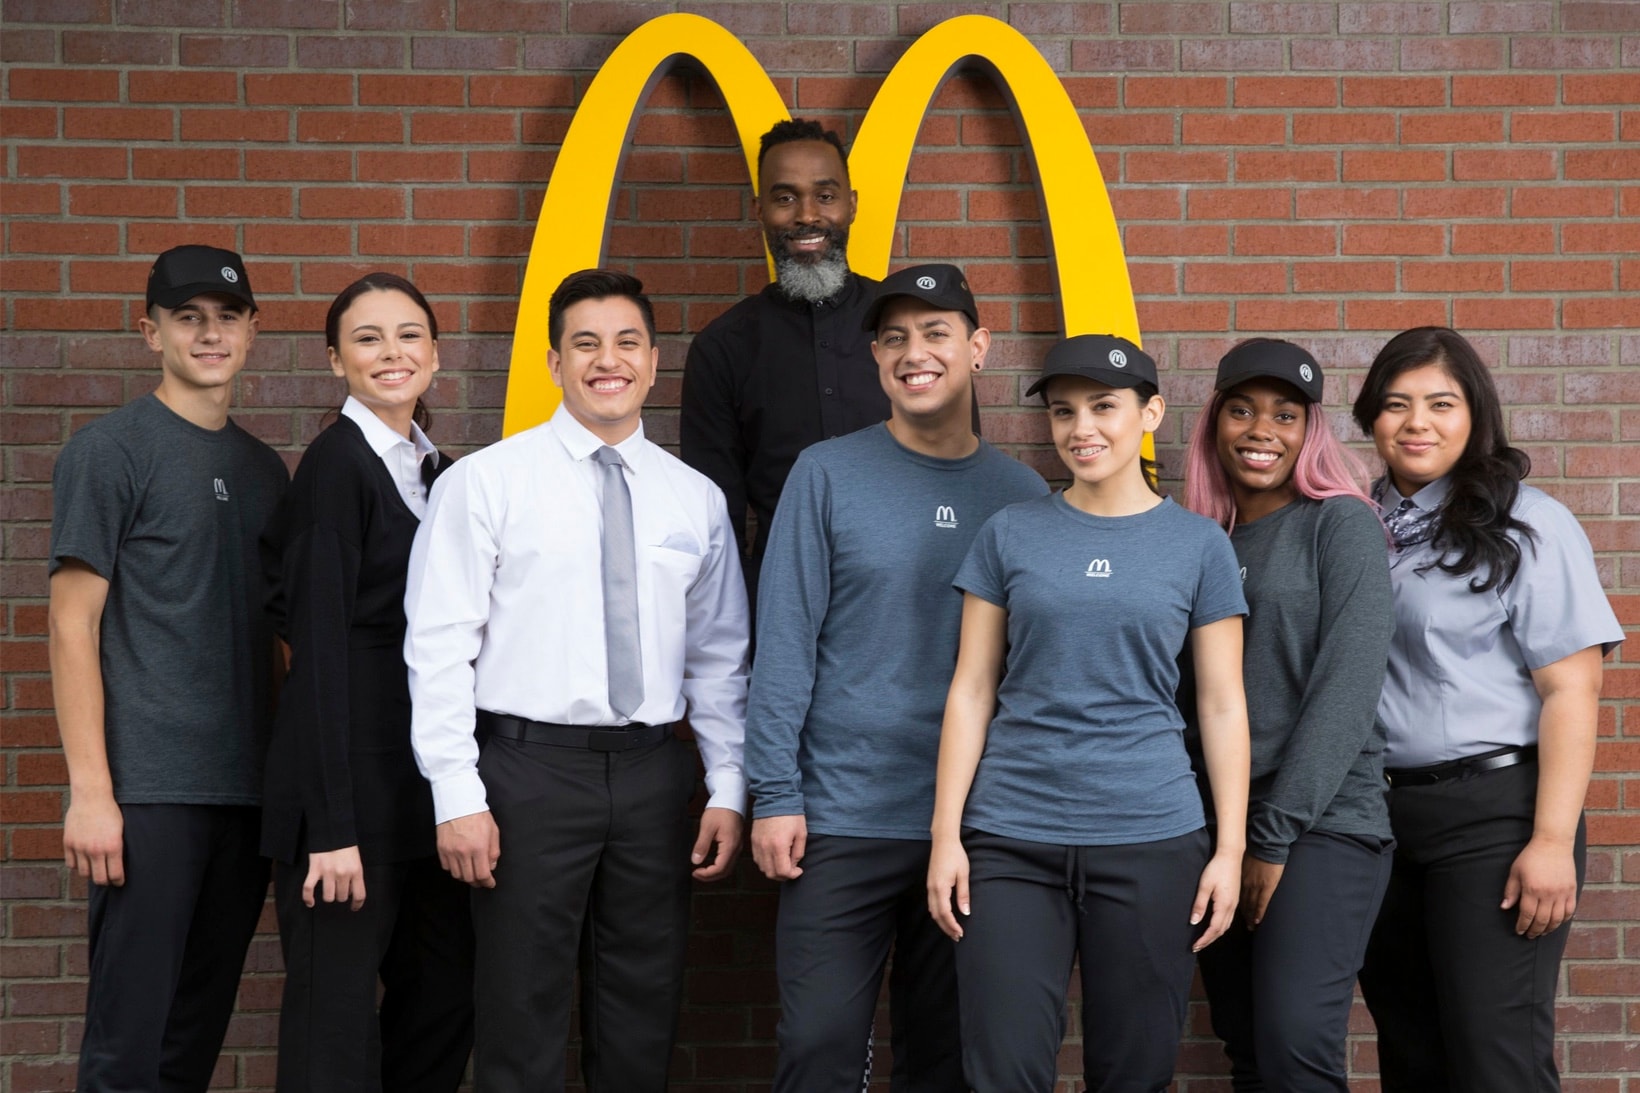 McDonald's Debuts New Uniforms by Waraire Boswell